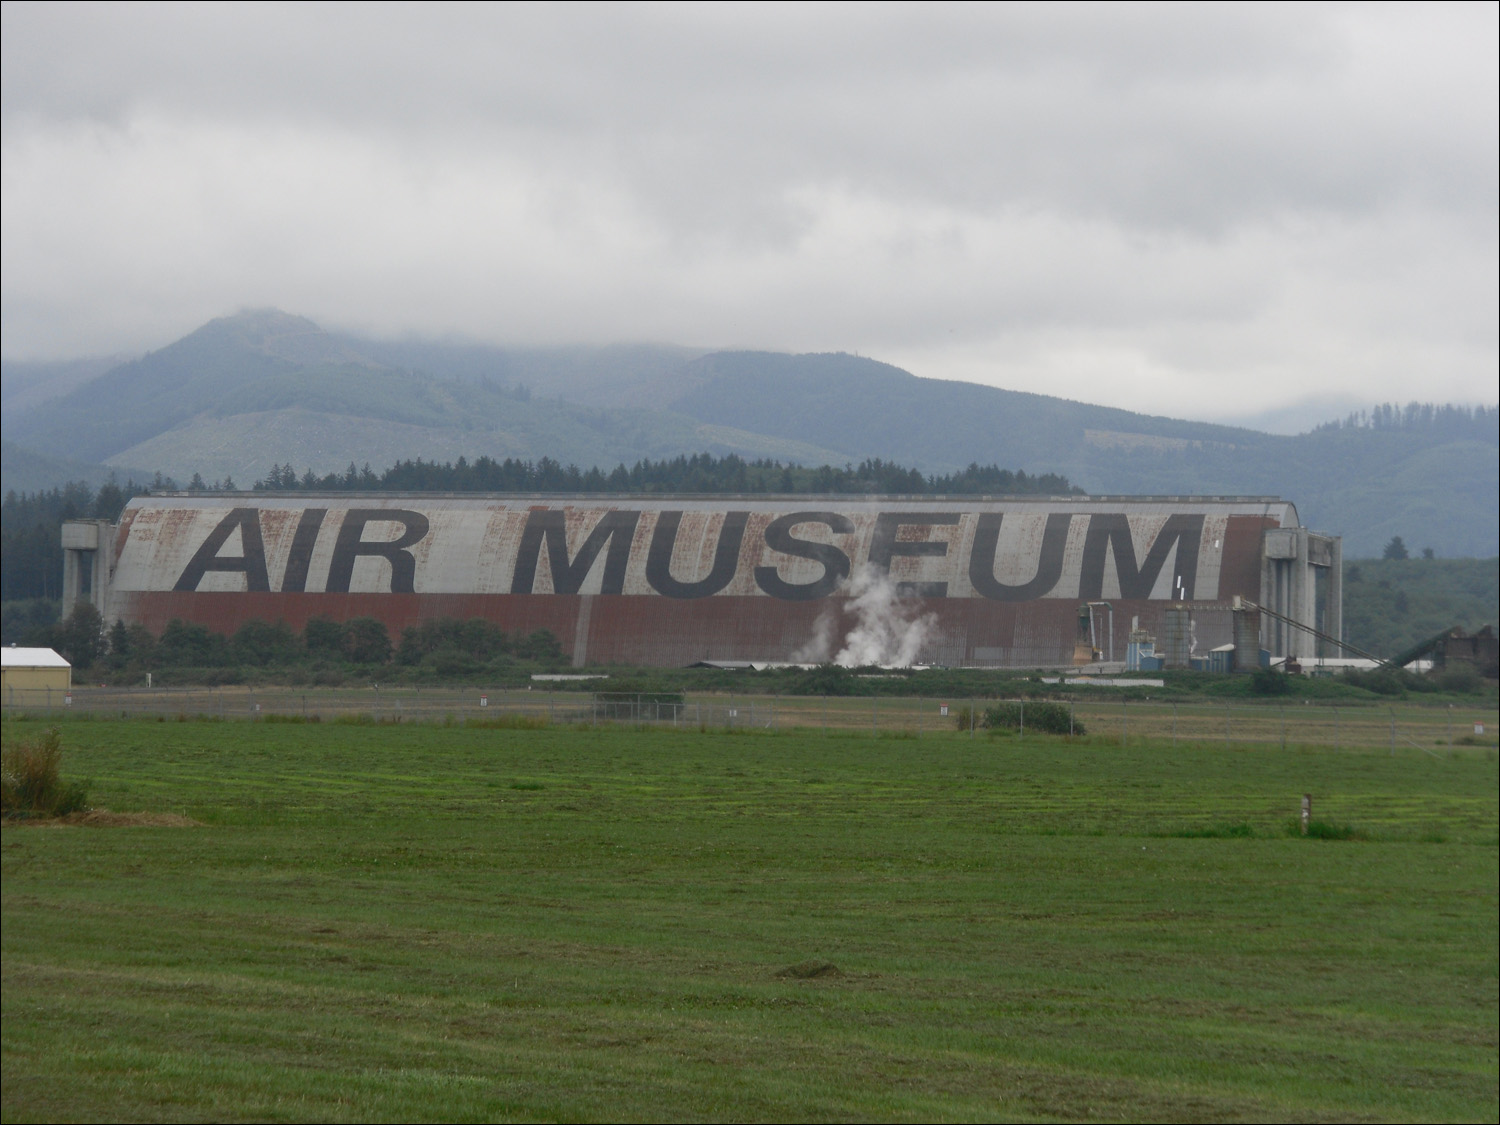 Tillamook, OR- Photos taken @ Tillamook Air Museum~ Formerly a WW2 Blimp hanger.  Largest wooden structure in the world